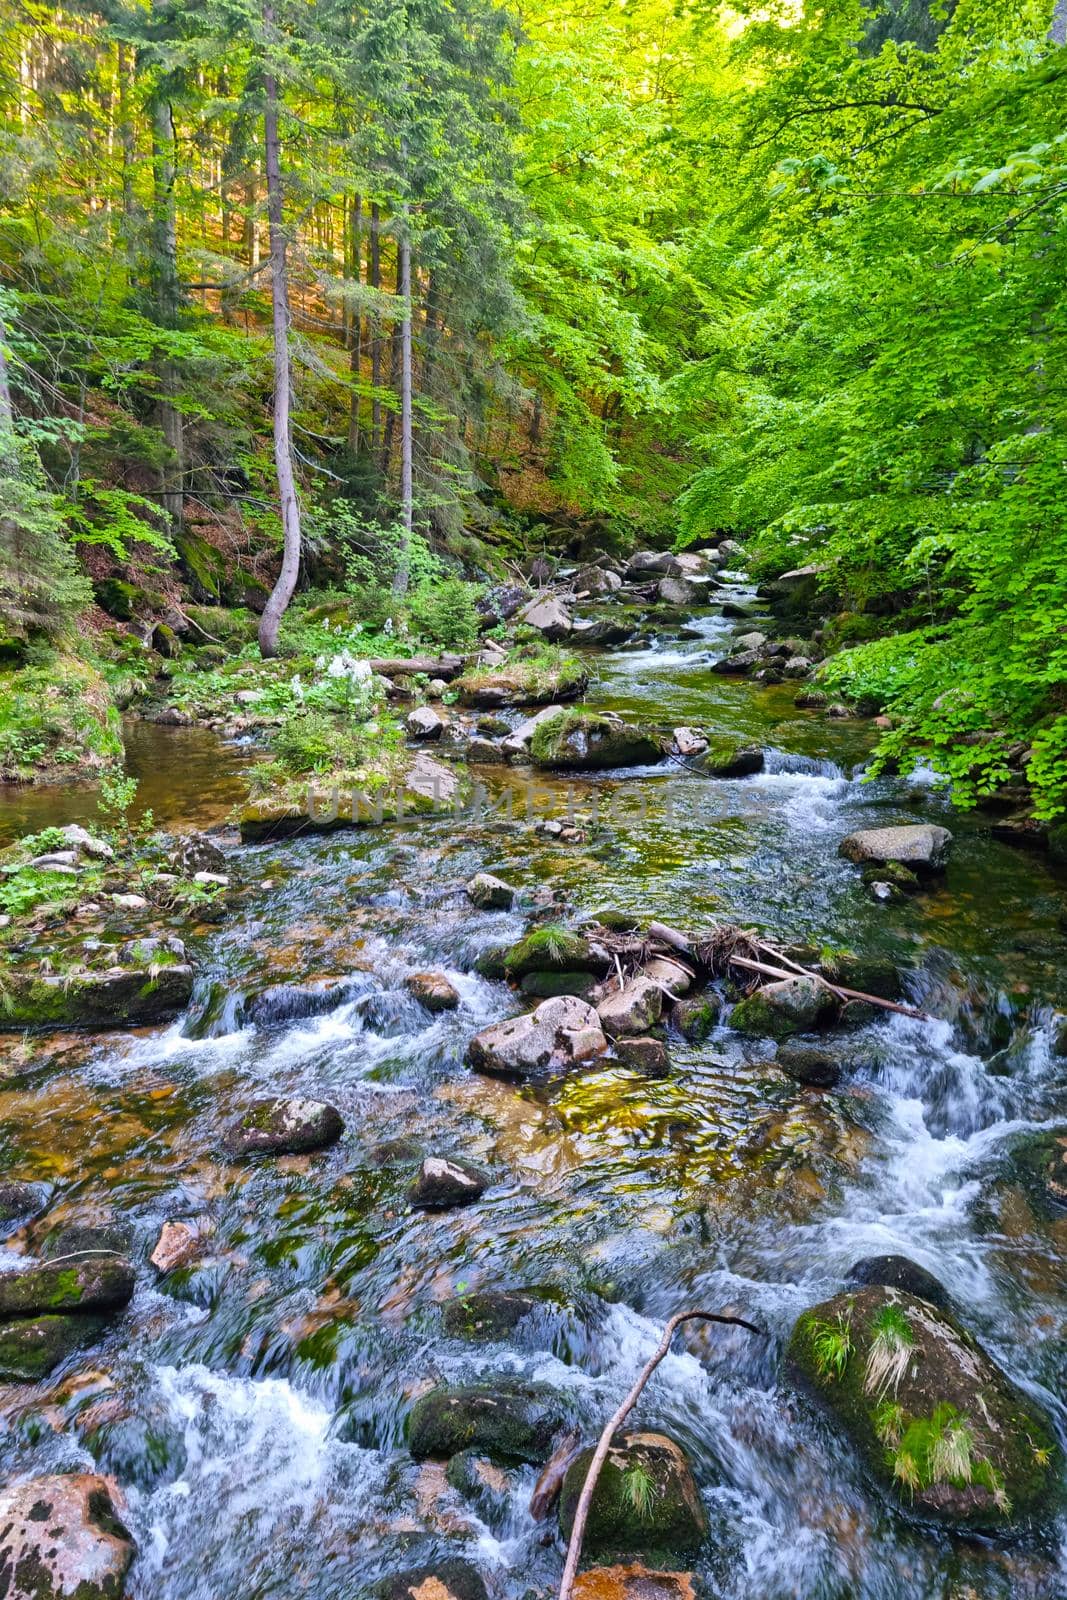 A small river flows over rocks in a green forest. by kip02kas